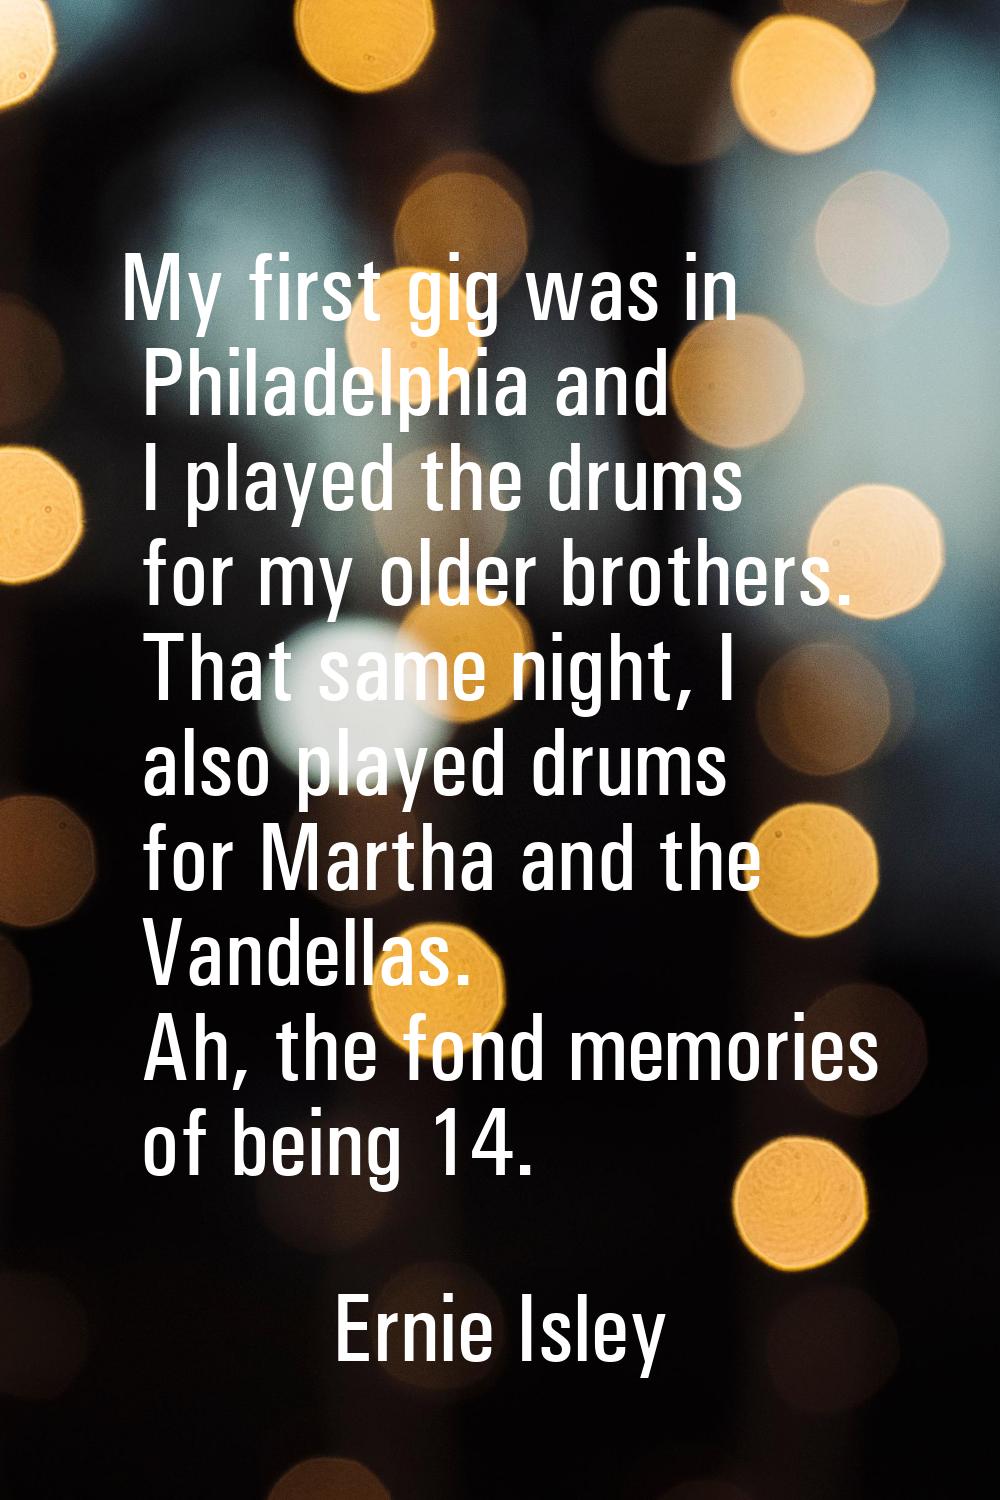 My first gig was in Philadelphia and I played the drums for my older brothers. That same night, I a